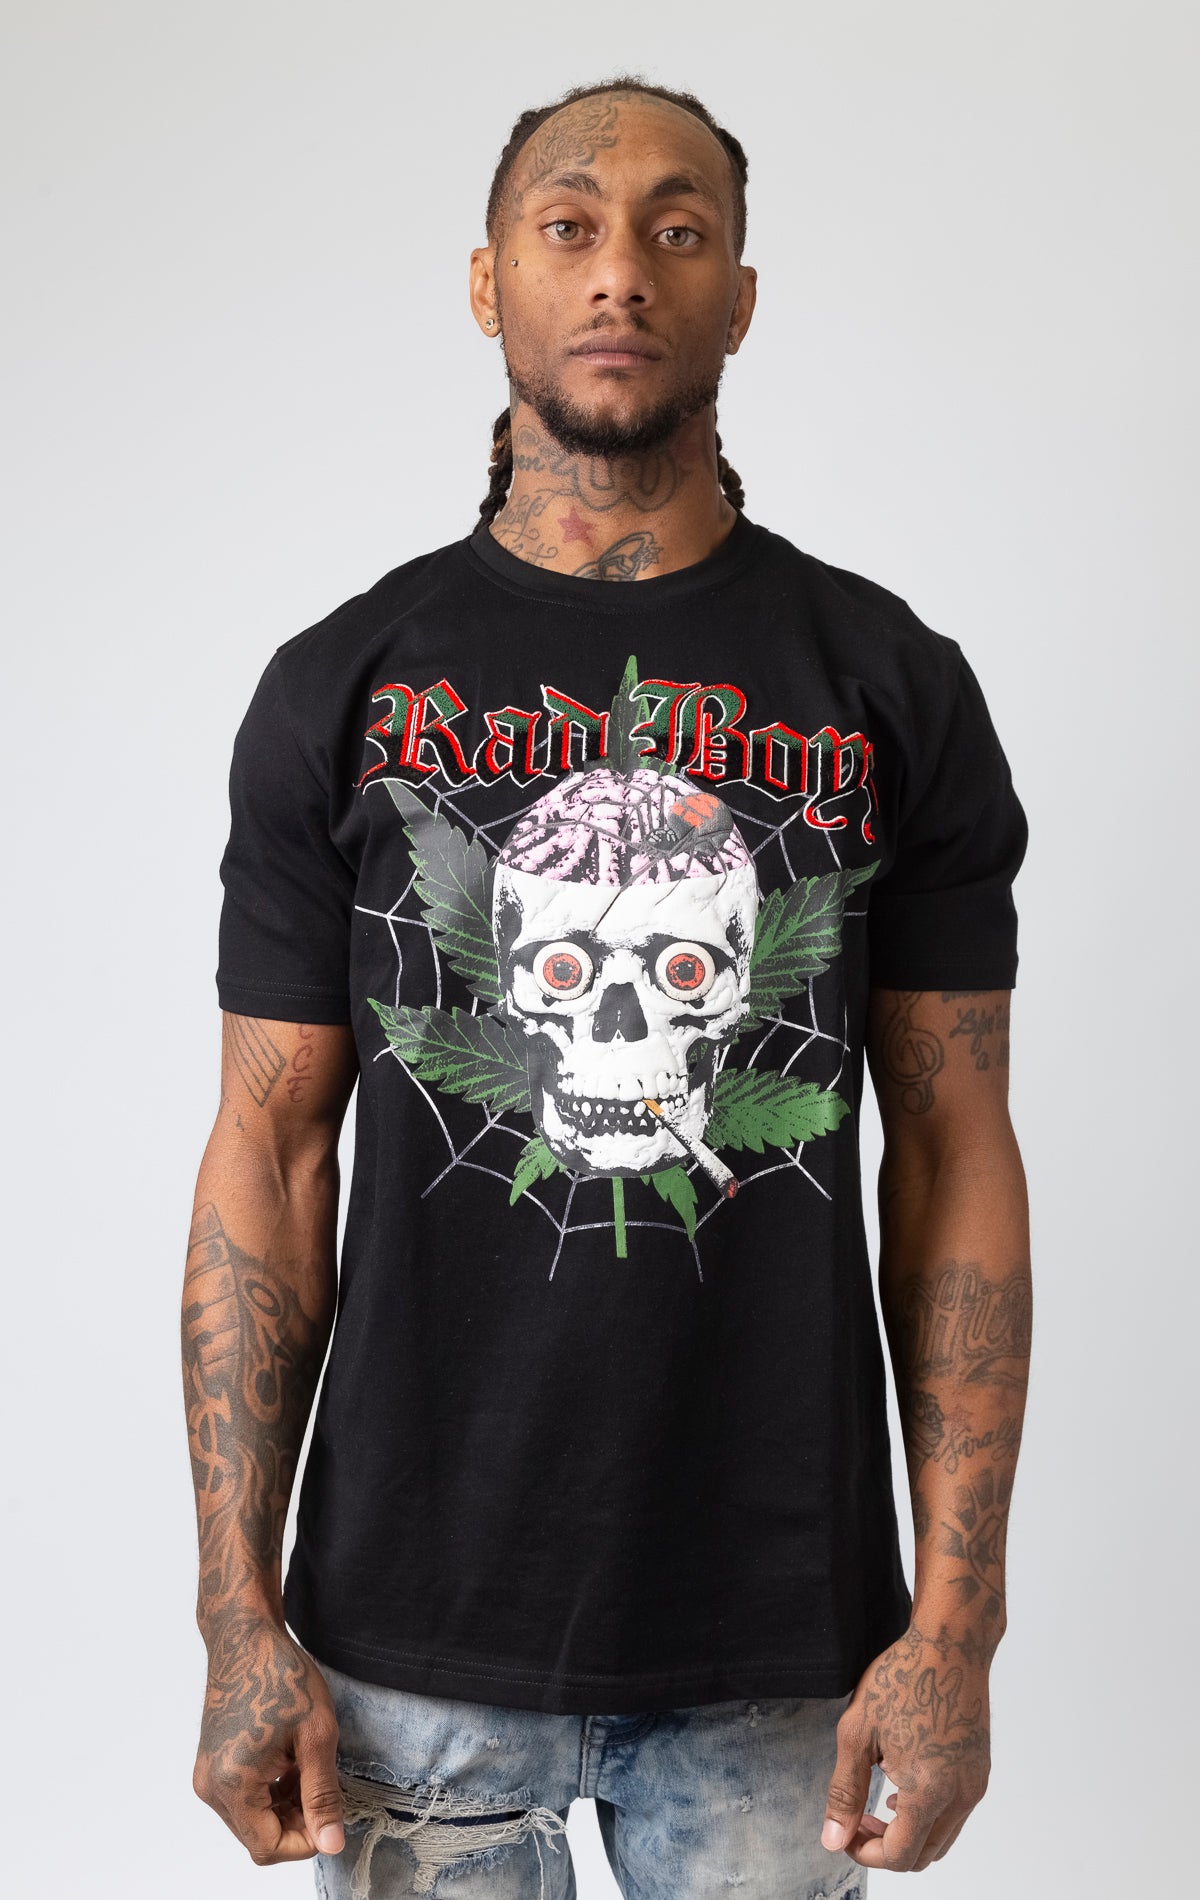 Featuring the RB-KT-017 Rad Boyz T-Shirt in sleek black, the Brain Dead Tour edition is a must-have for any fashion-forward and edgy individual. Crafted with top-notch materials, this comfy and true-to-size shirt is ideal for showcasing your one-of-a-kind style.